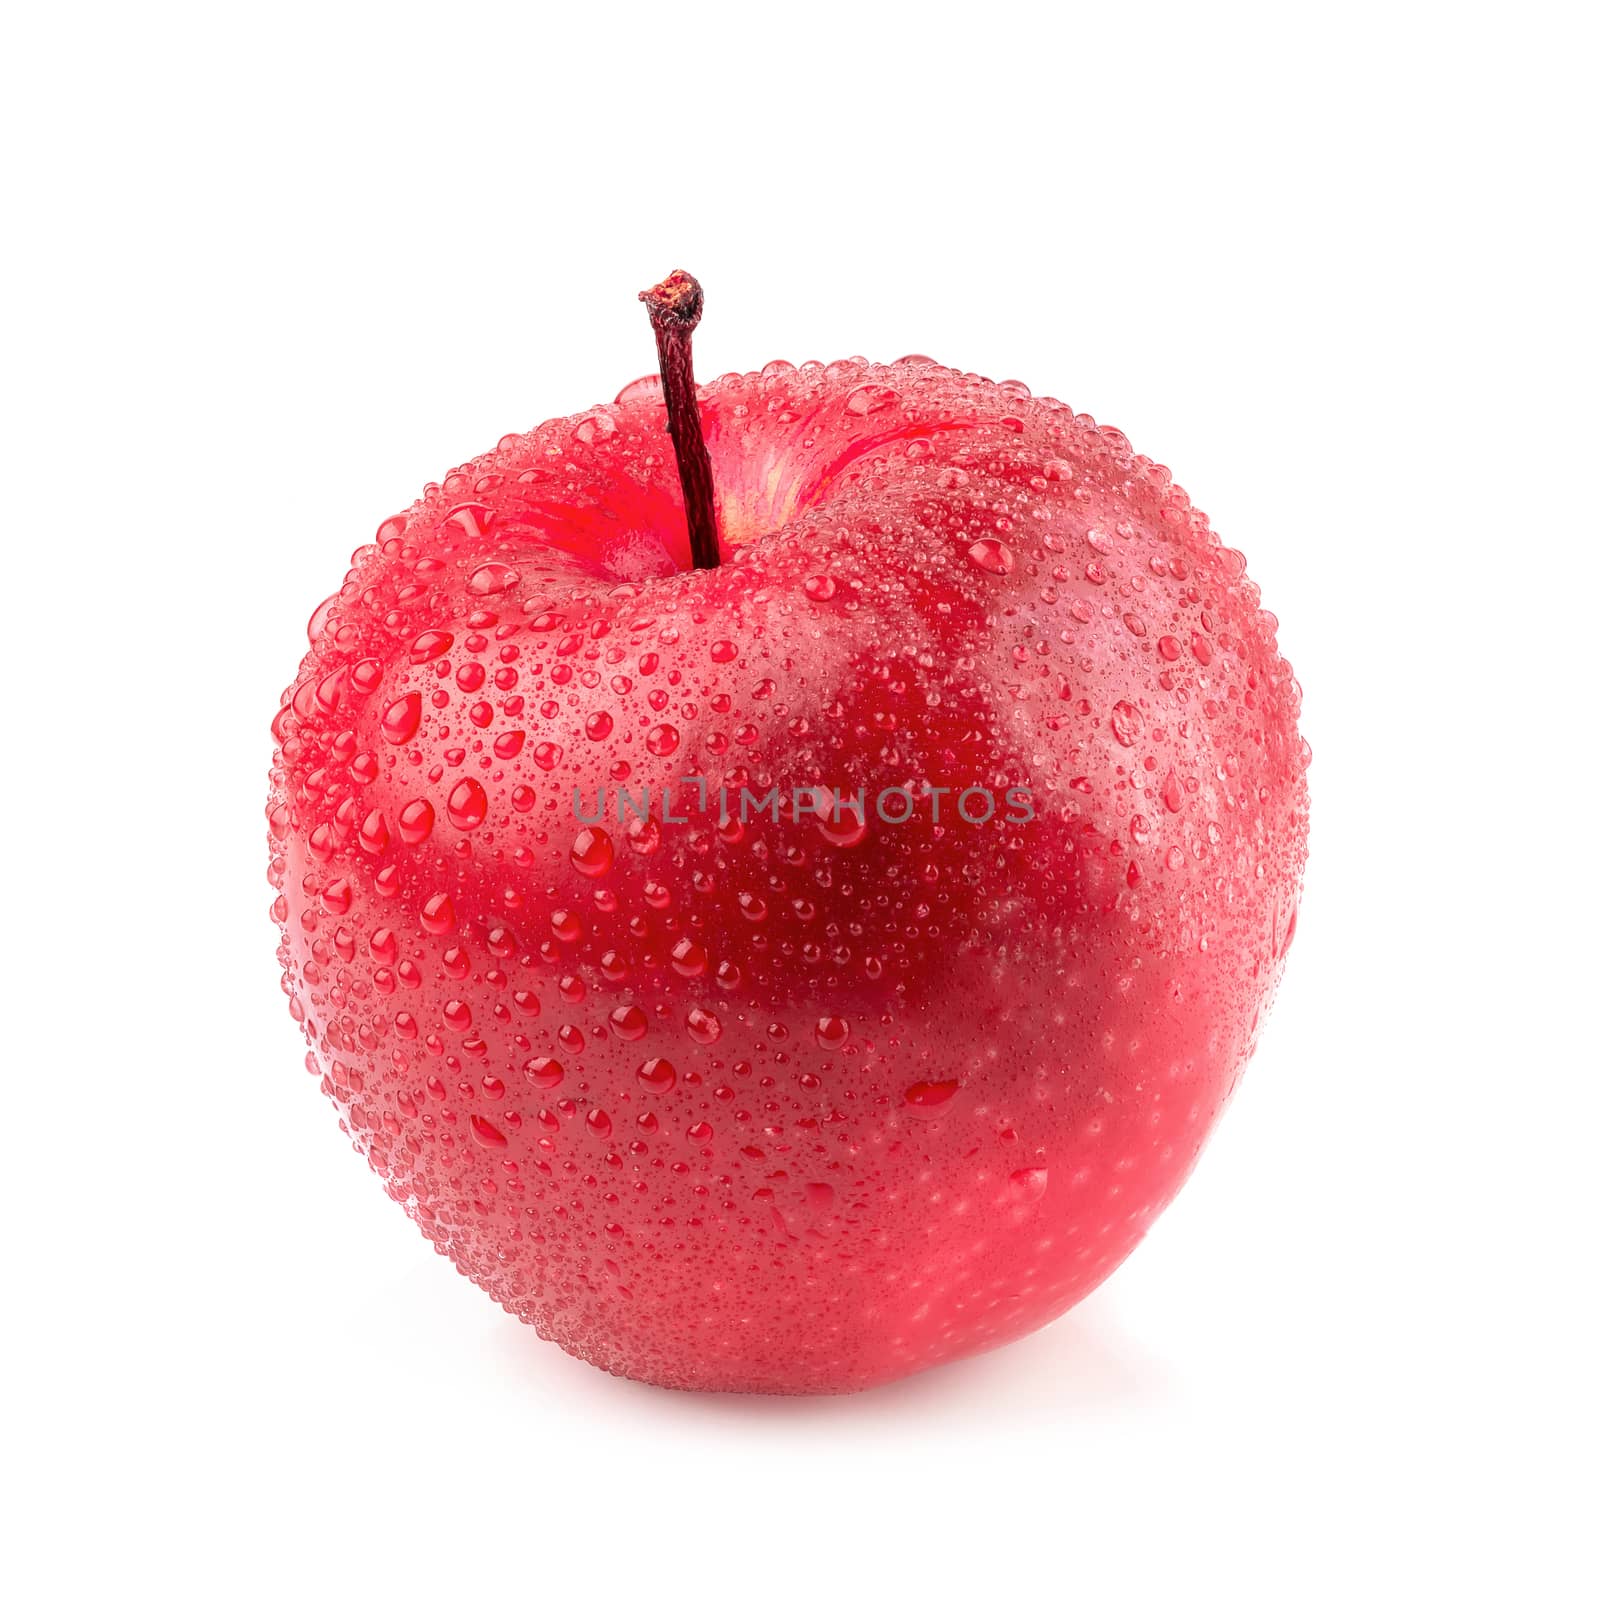 Red apple whole pieces isolated on white background.